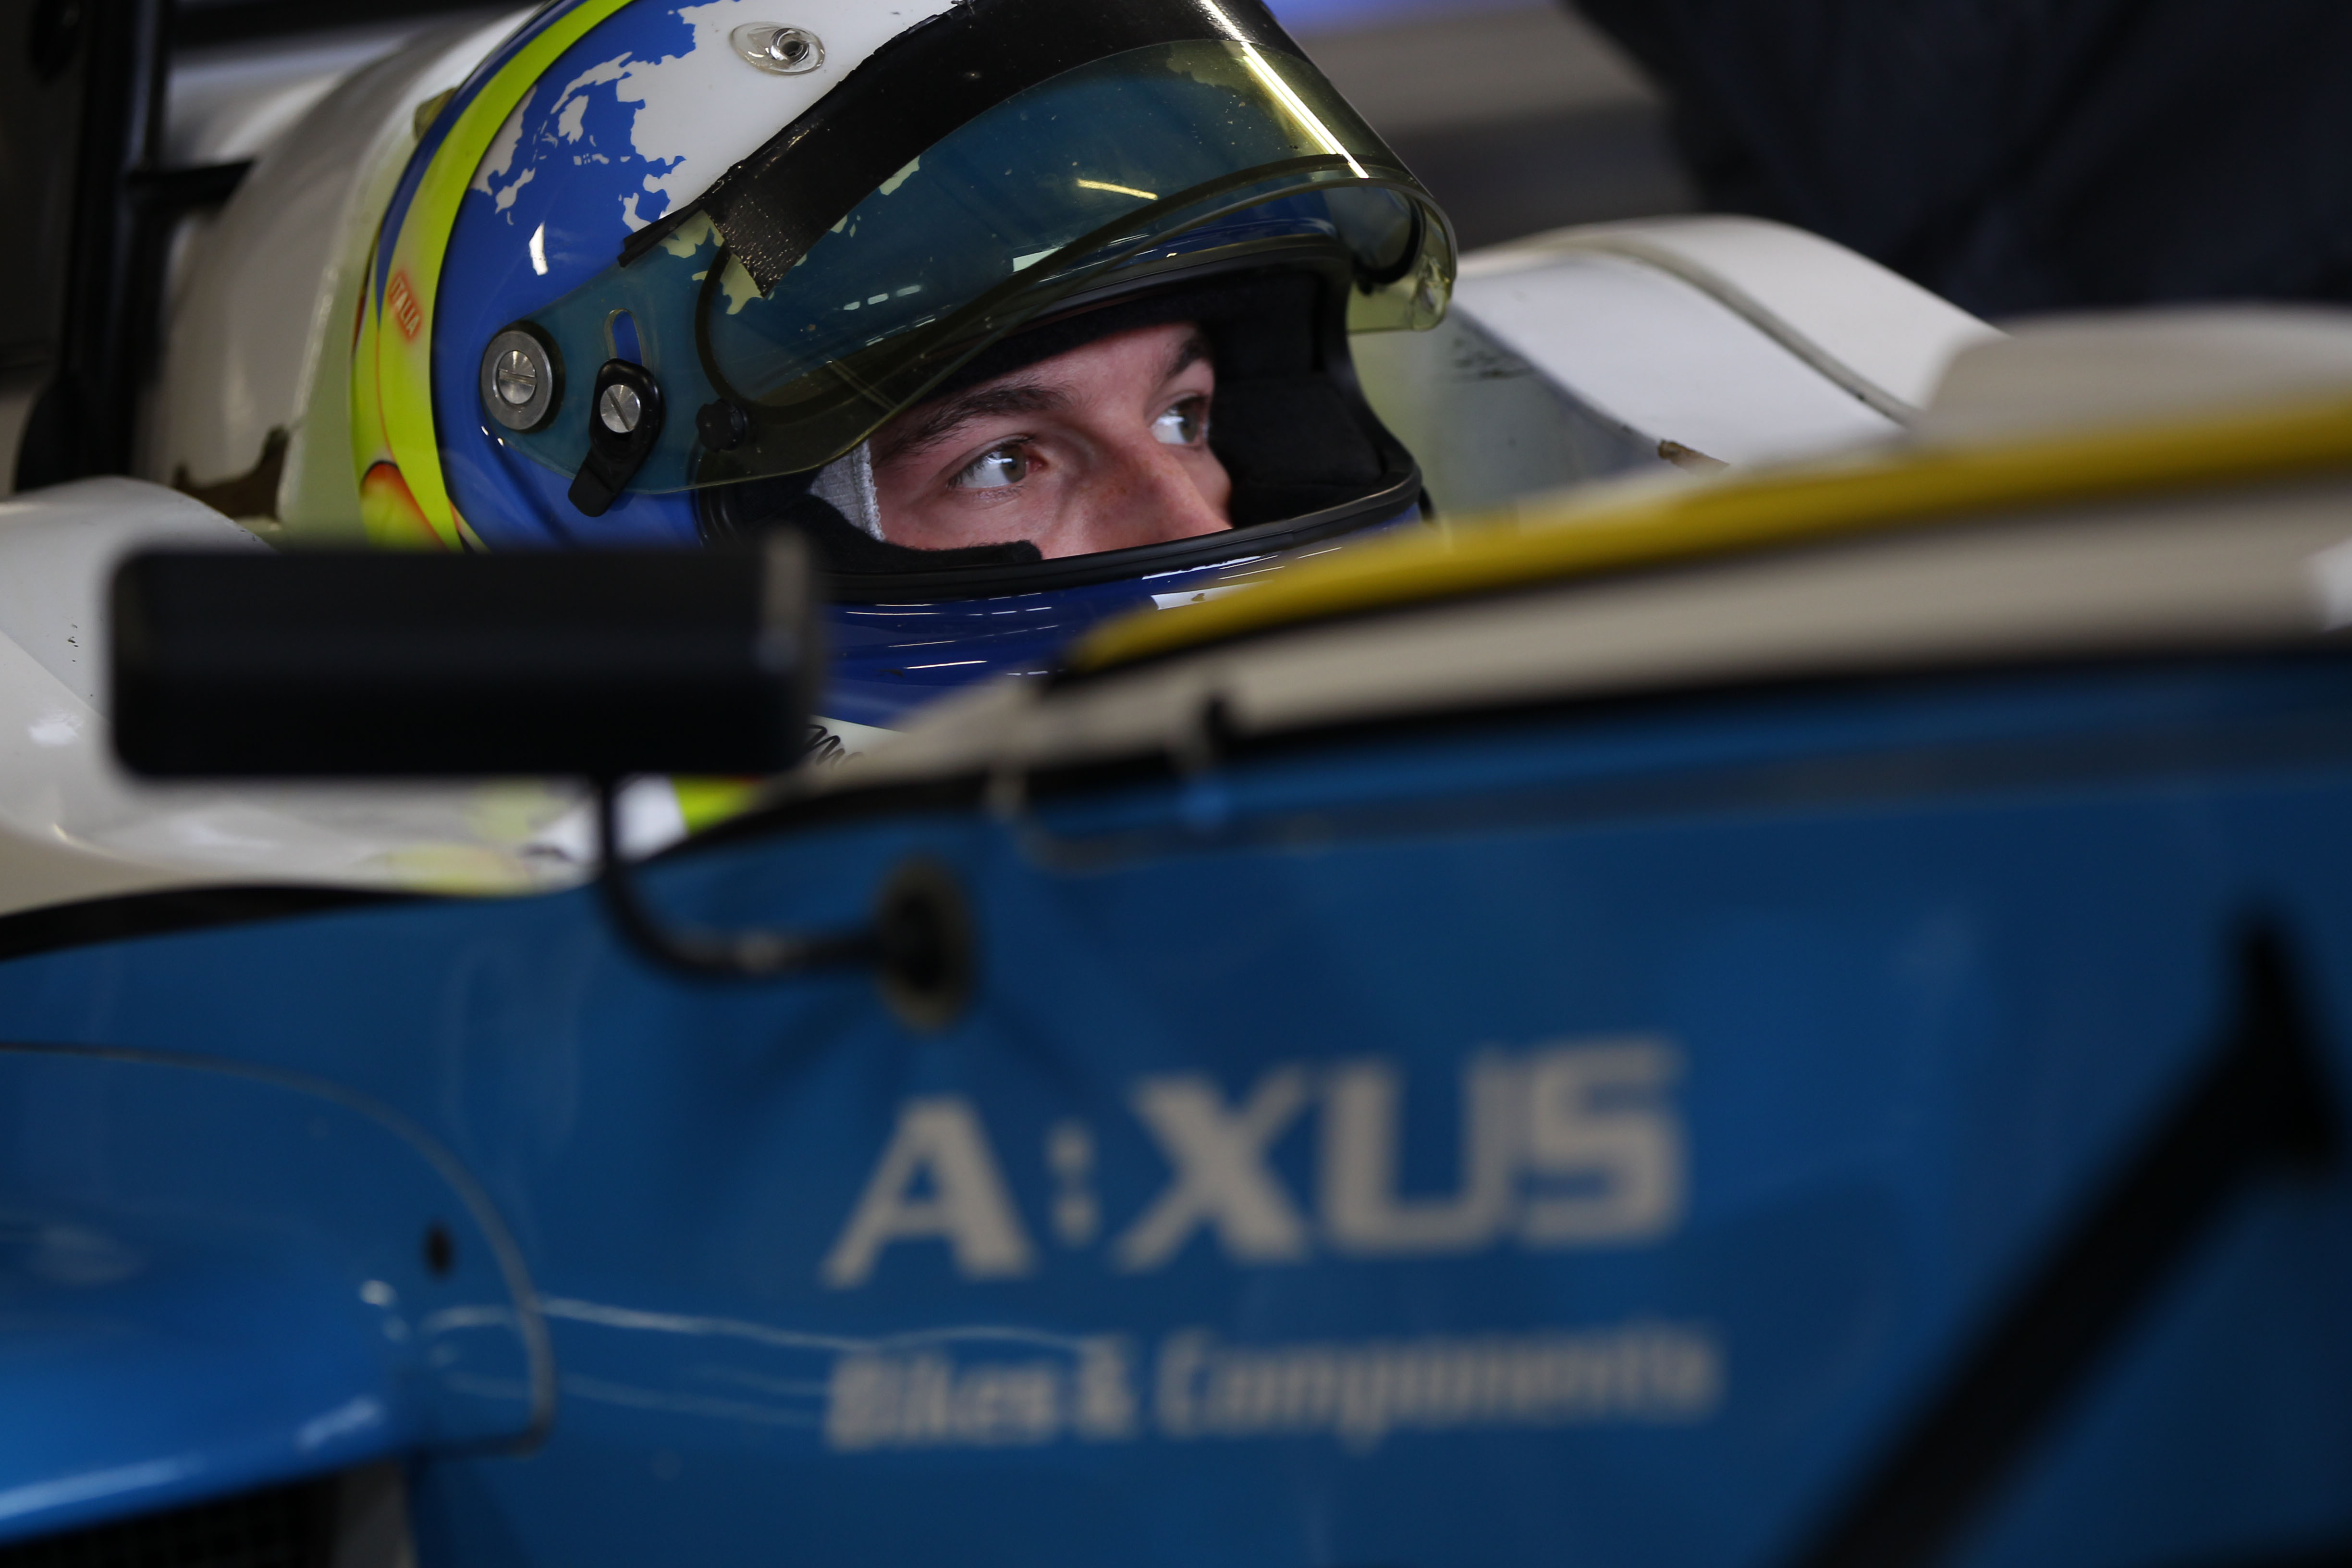 Matteo Ferrer sits in his car with his helmet on at Brands Hatch in the 2013 Formula 4 Winter Championship